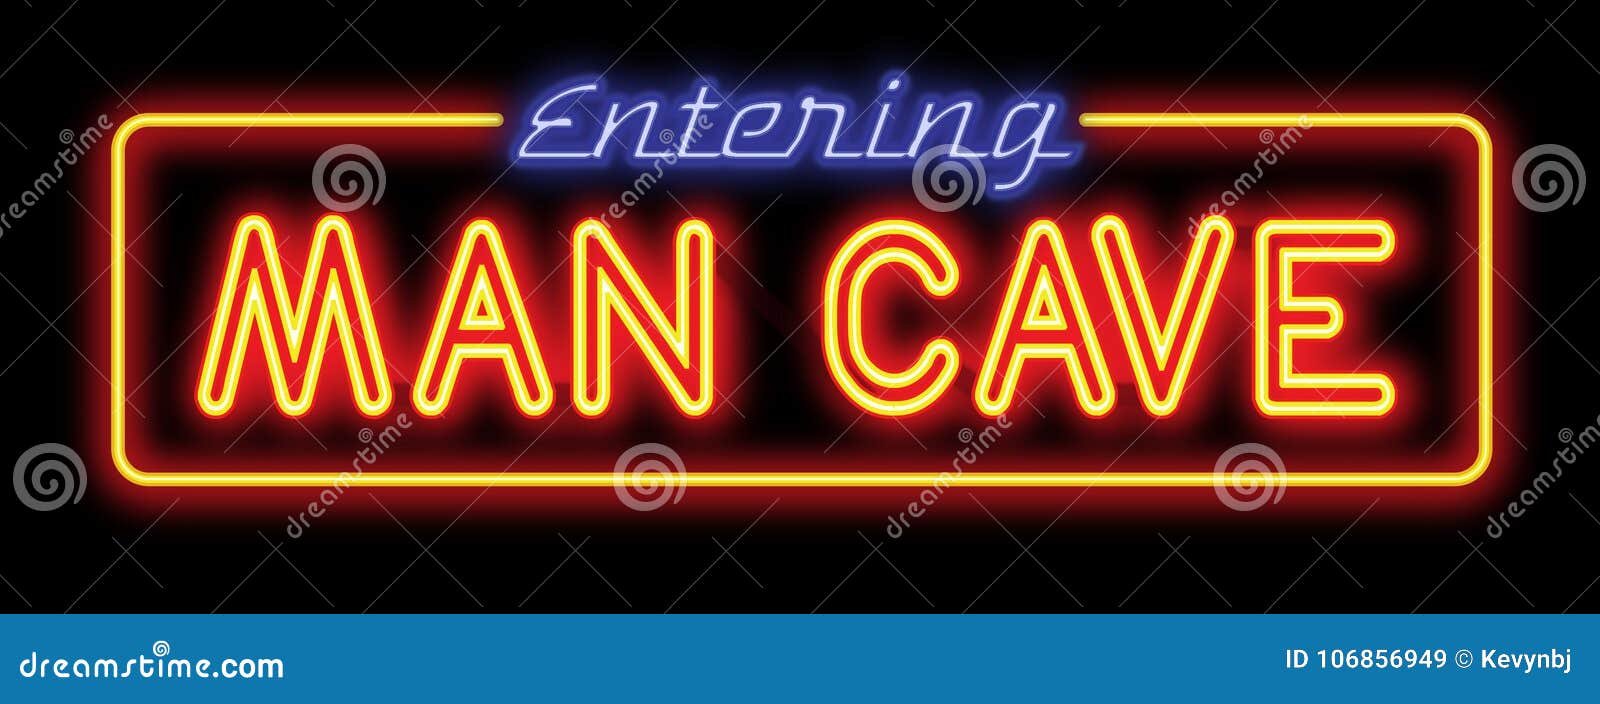 man cave neon sign